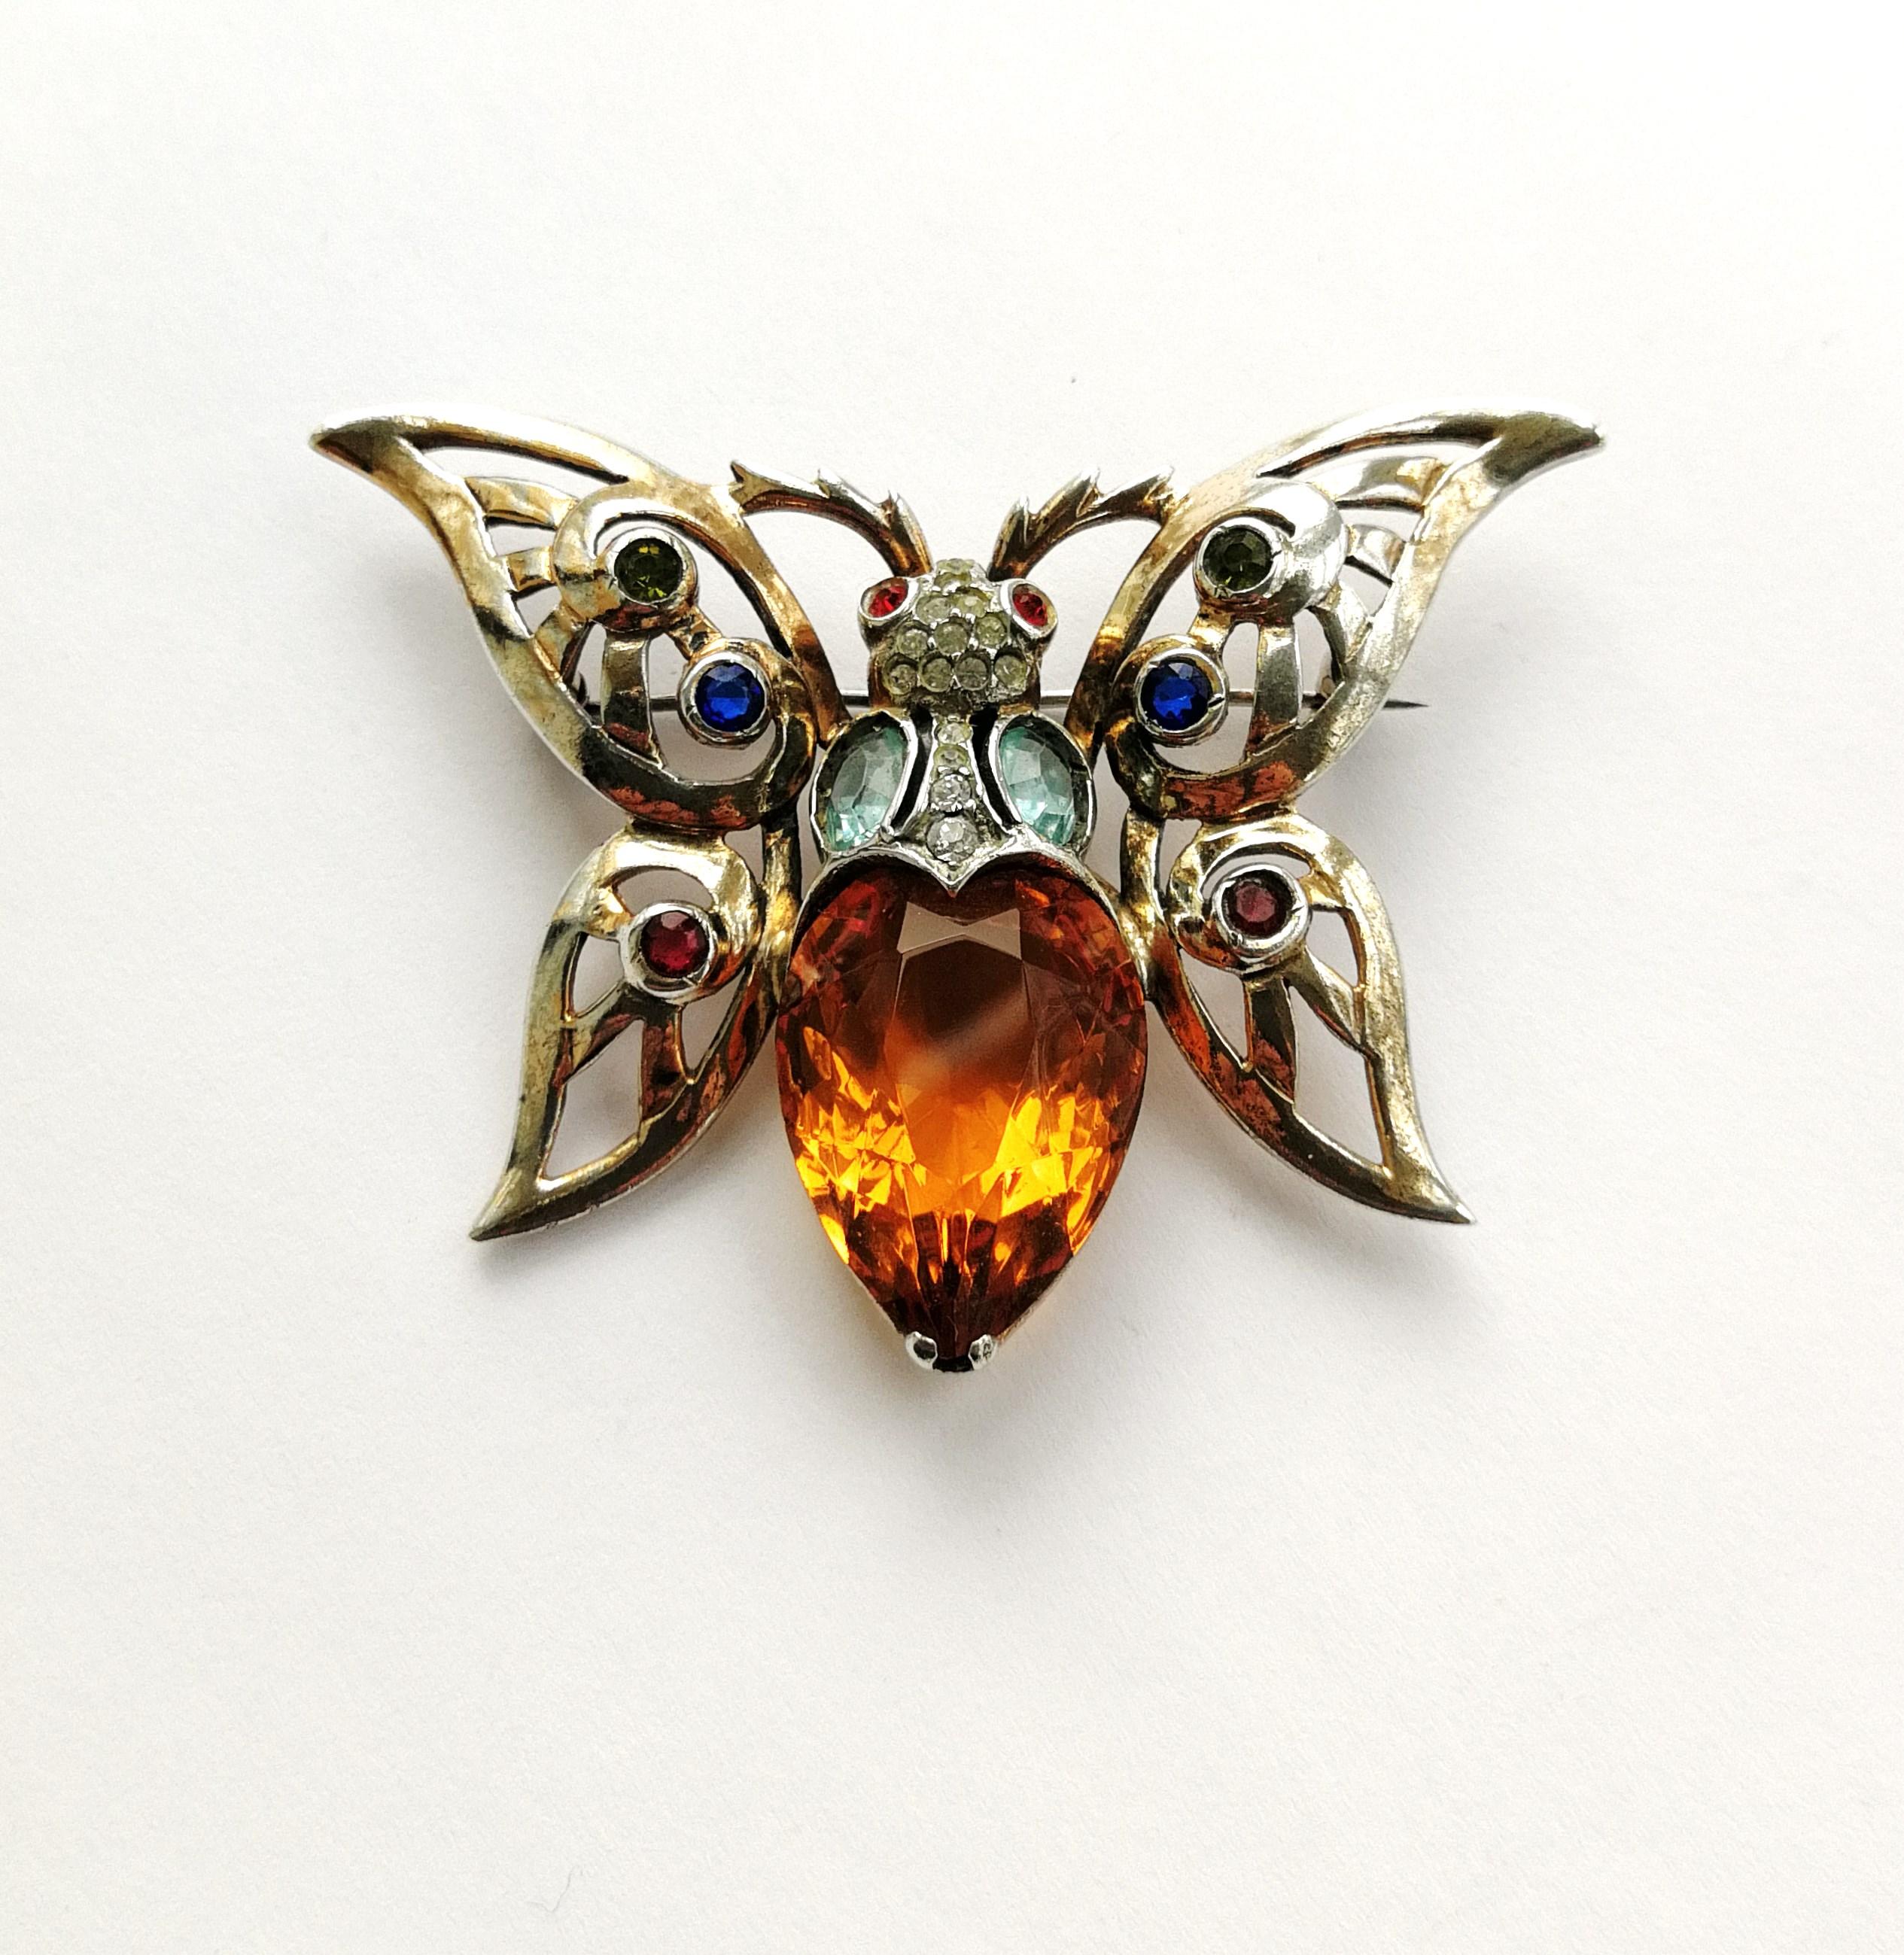 A very striking sterling brooch of a butterfly, with a large topaz paste 'body' and other clear and coloured pastes, highlighting the open wings, all set in sterling silver with a soft rose coloured gold wash. Highly typical of costume jewellery of